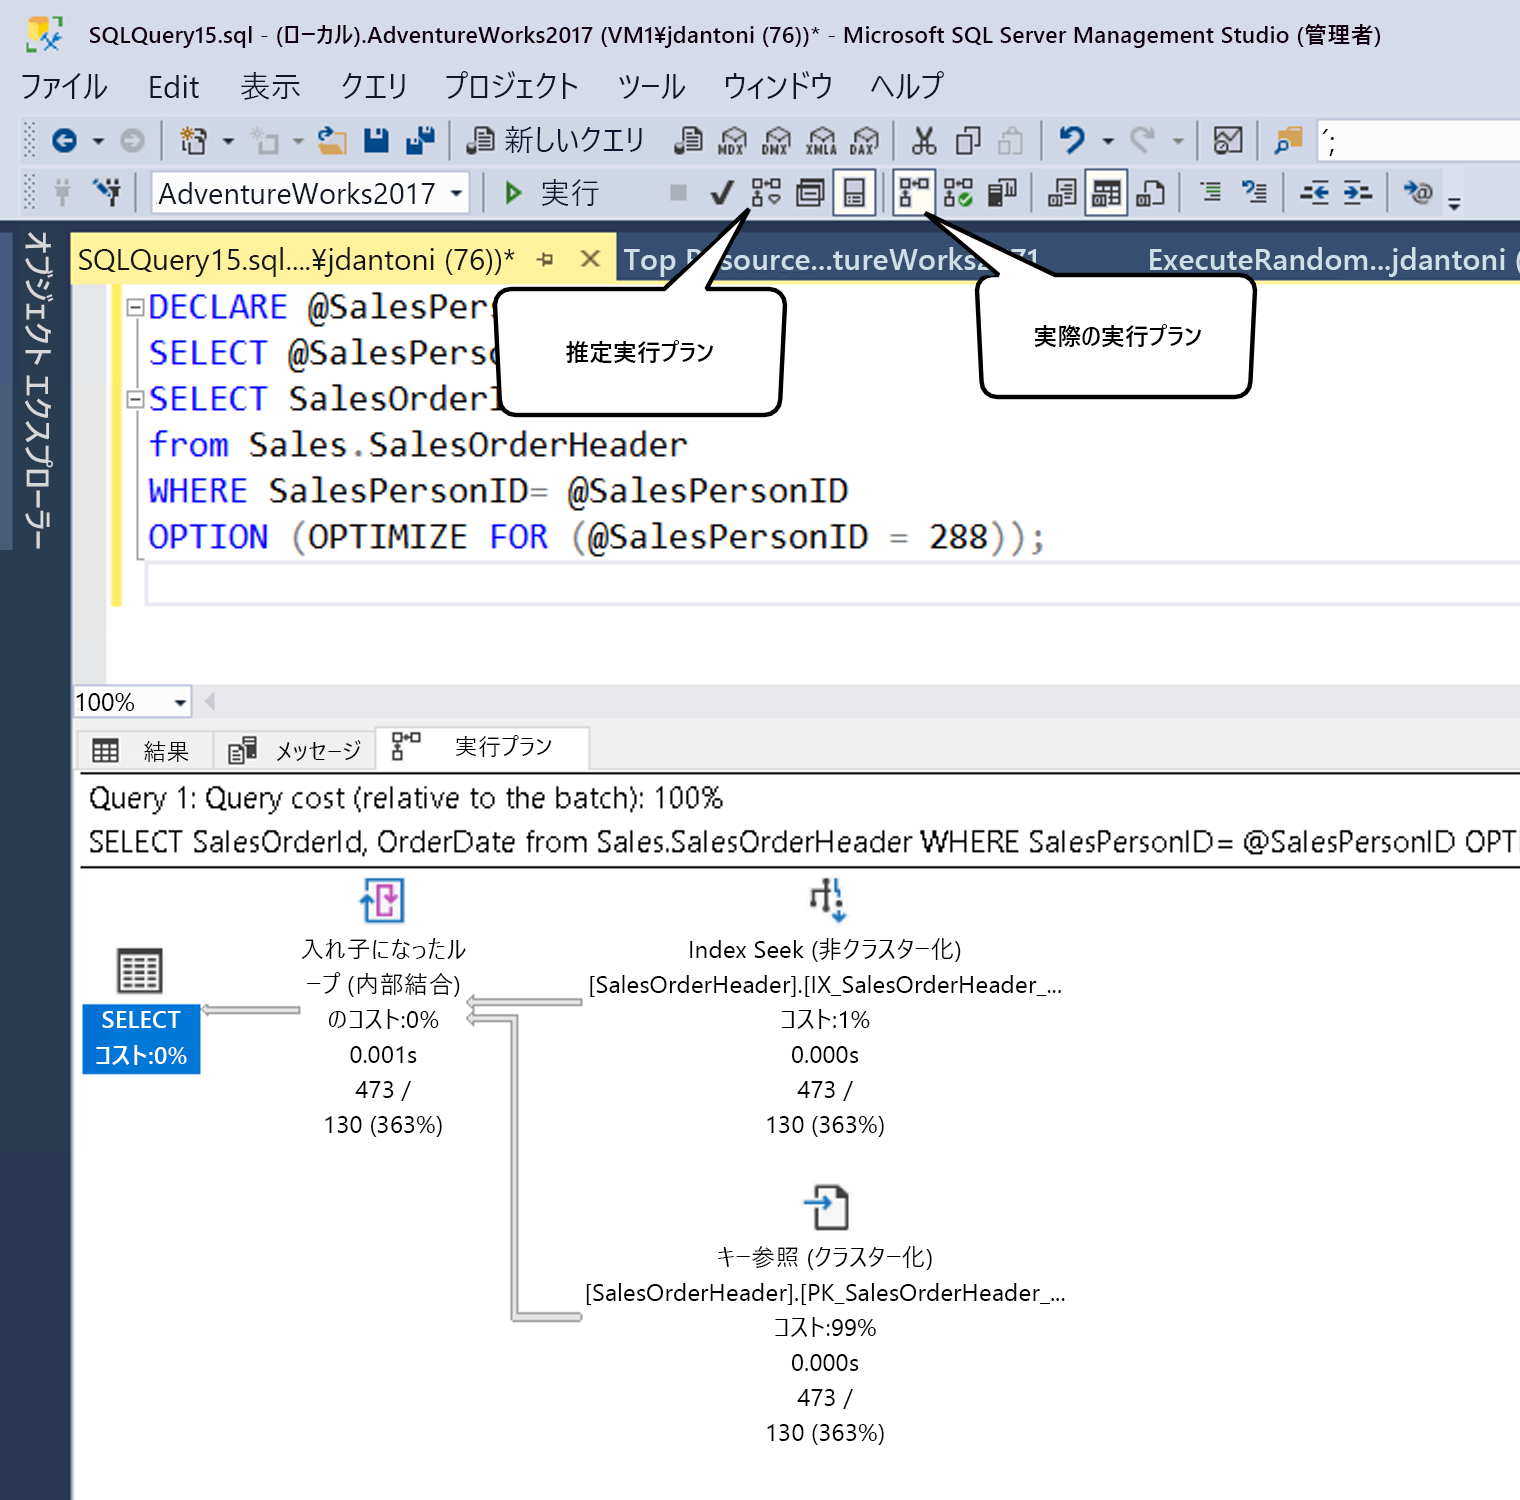 Screenshot of an estimated execution plan generated in SQL Server Management Studio.